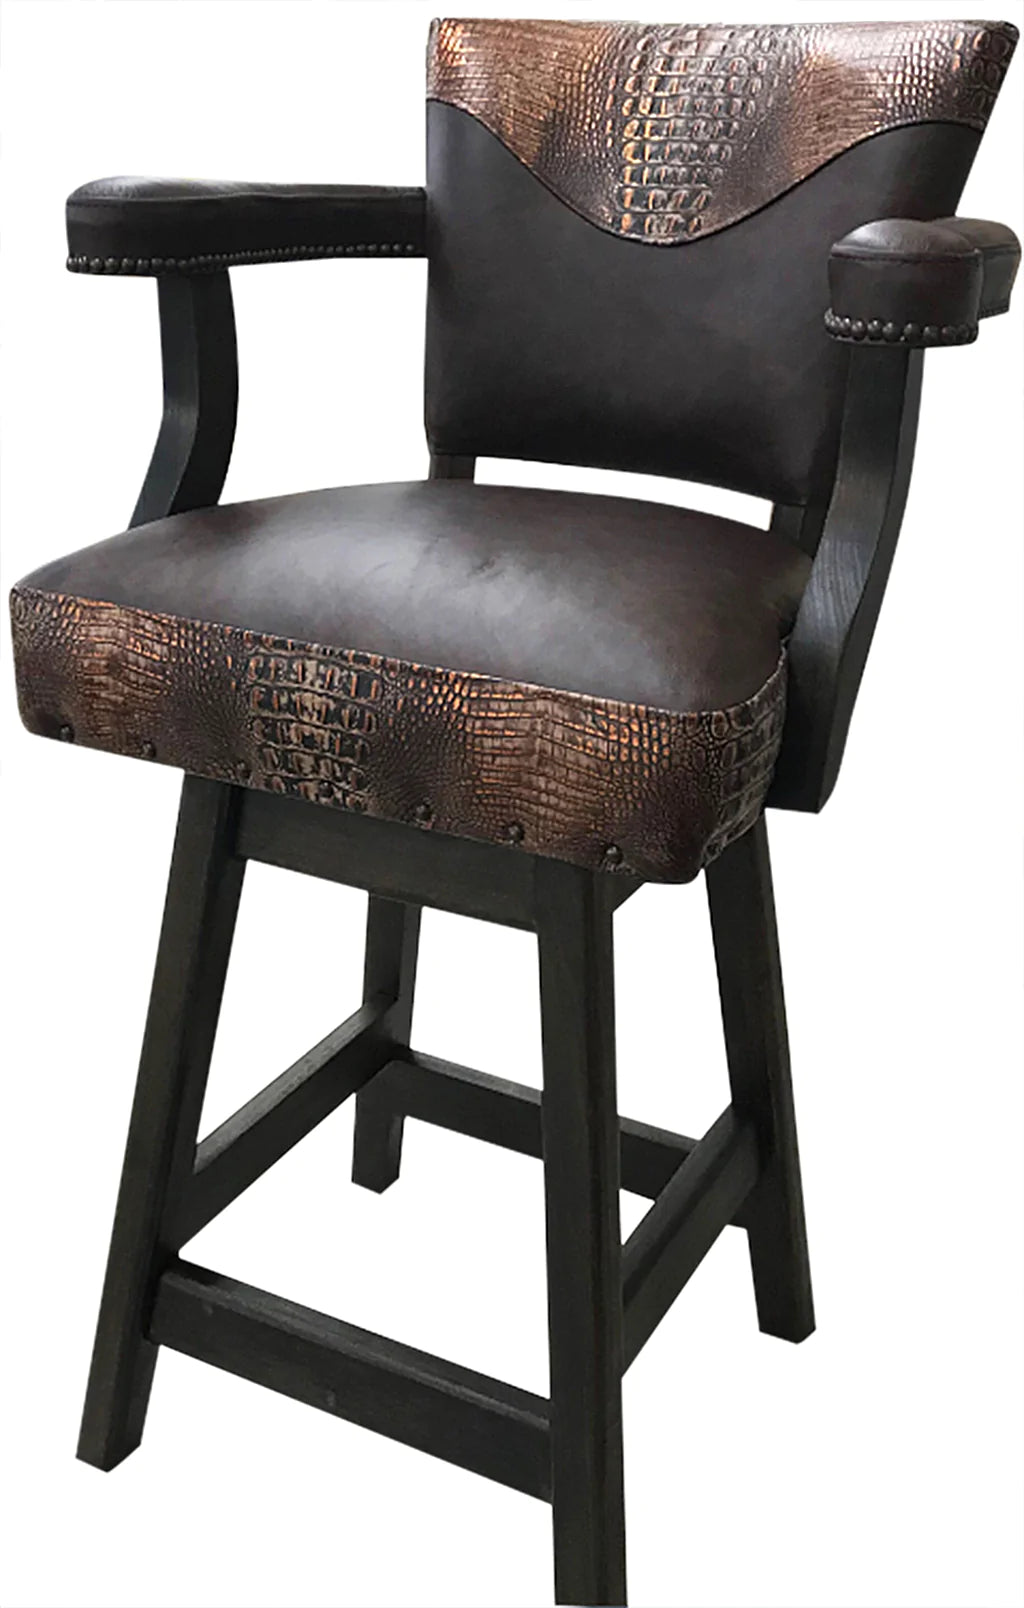 Cave Creek Distressed Leather with Copper accented Gator Barstool